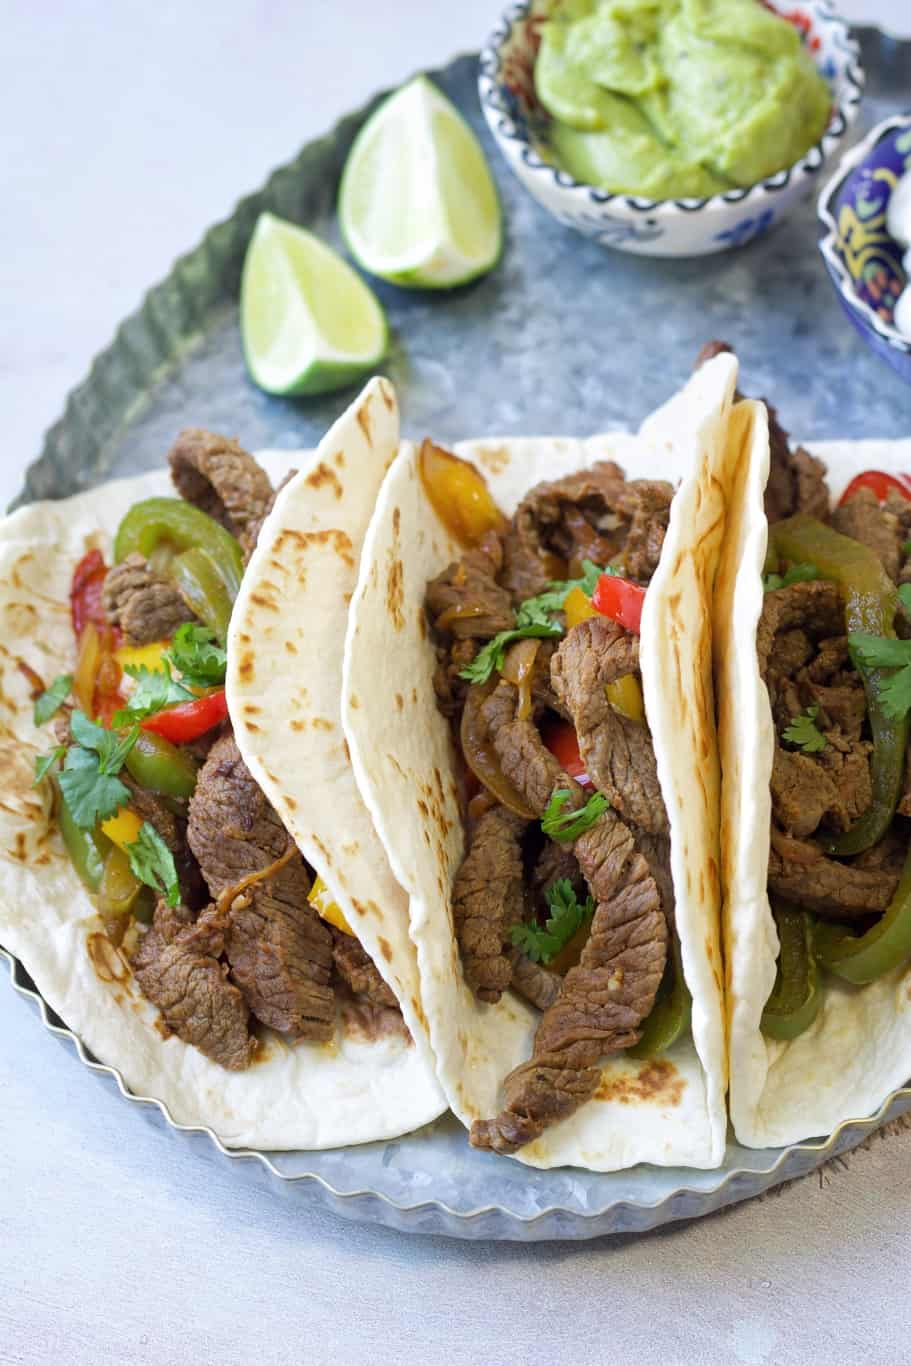 keto steak fajita tortillas made up of cooked skirt steak, onions, and bell peppers, sprinkled with chopped cilantro, and served with lime wedges and guacamole